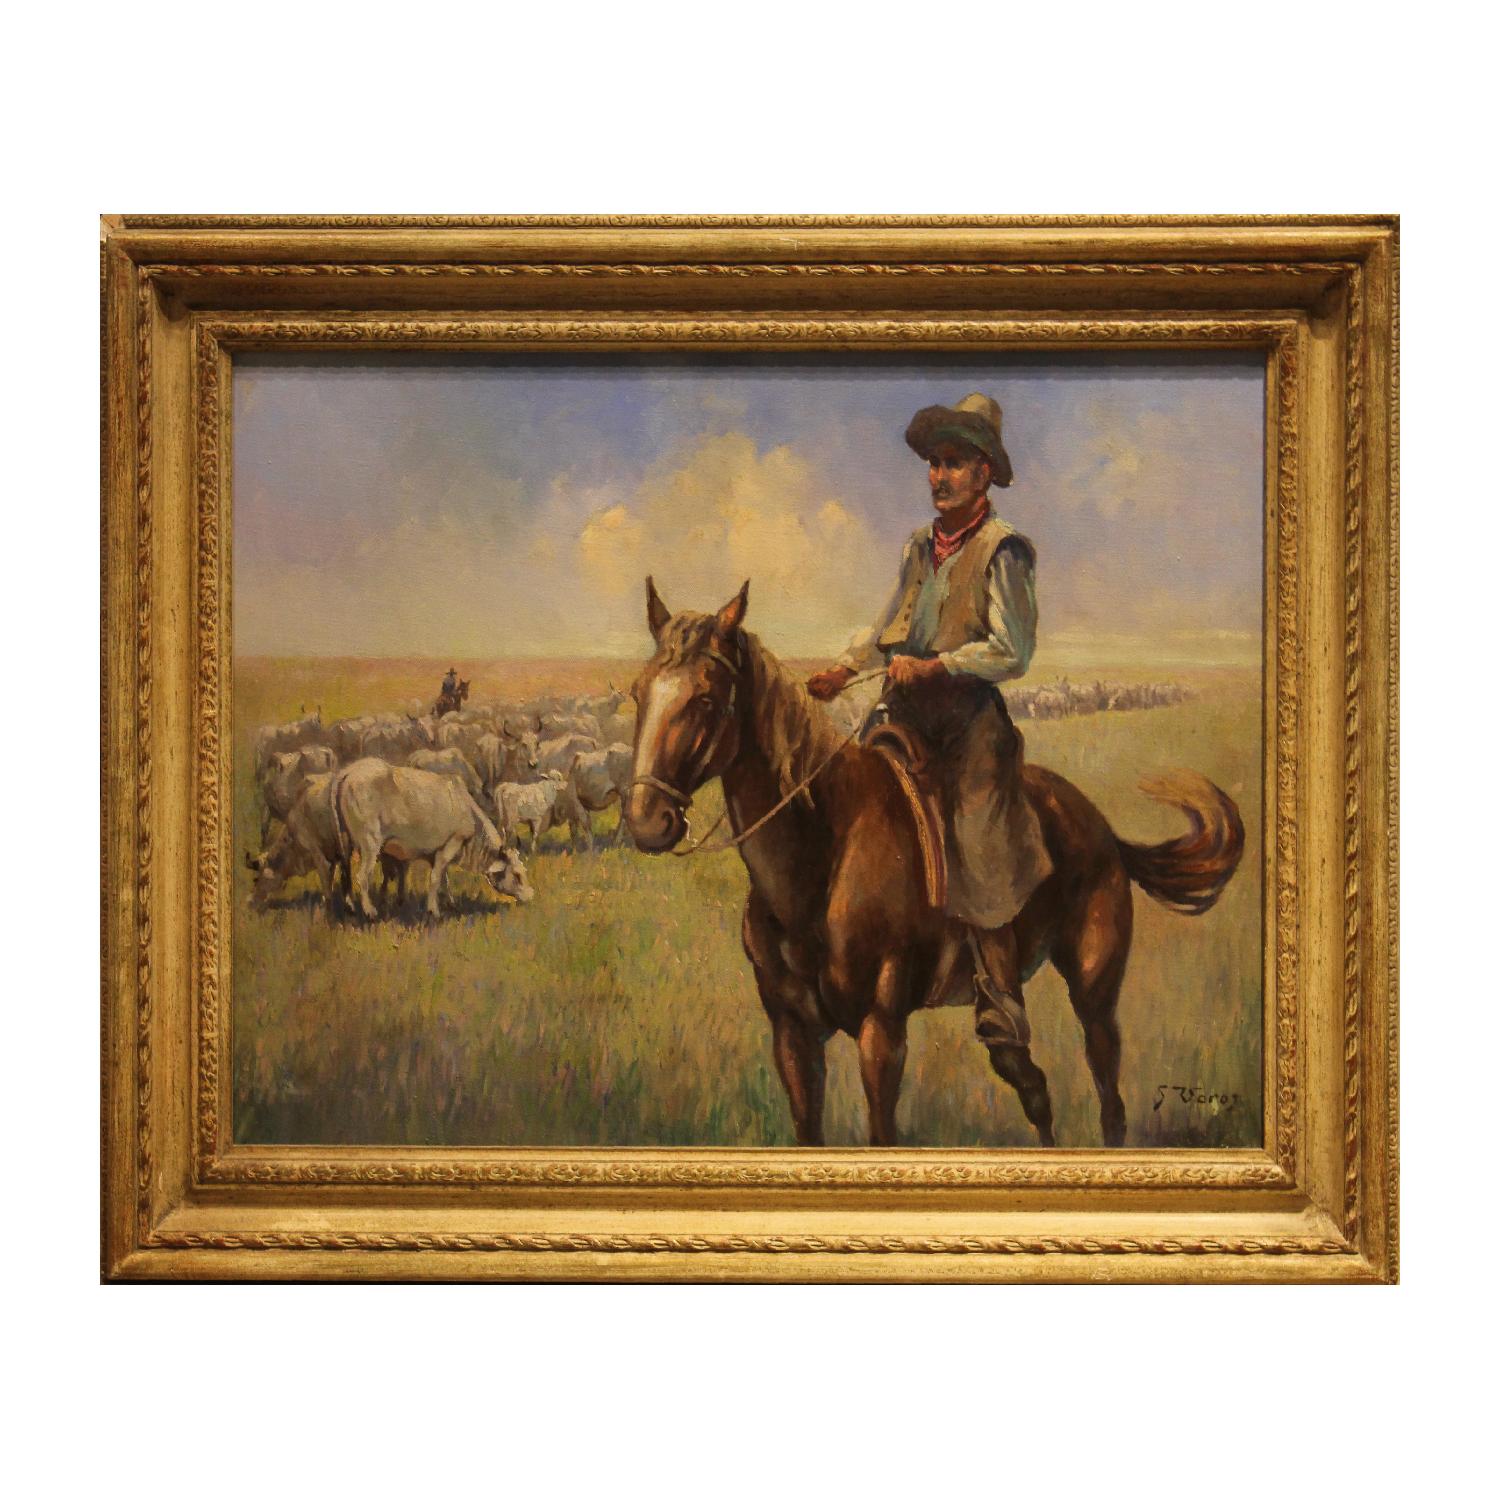 Unknown Figurative Painting - Naturalistic Cowboys Herding Cattle Western Painting Signed Voros